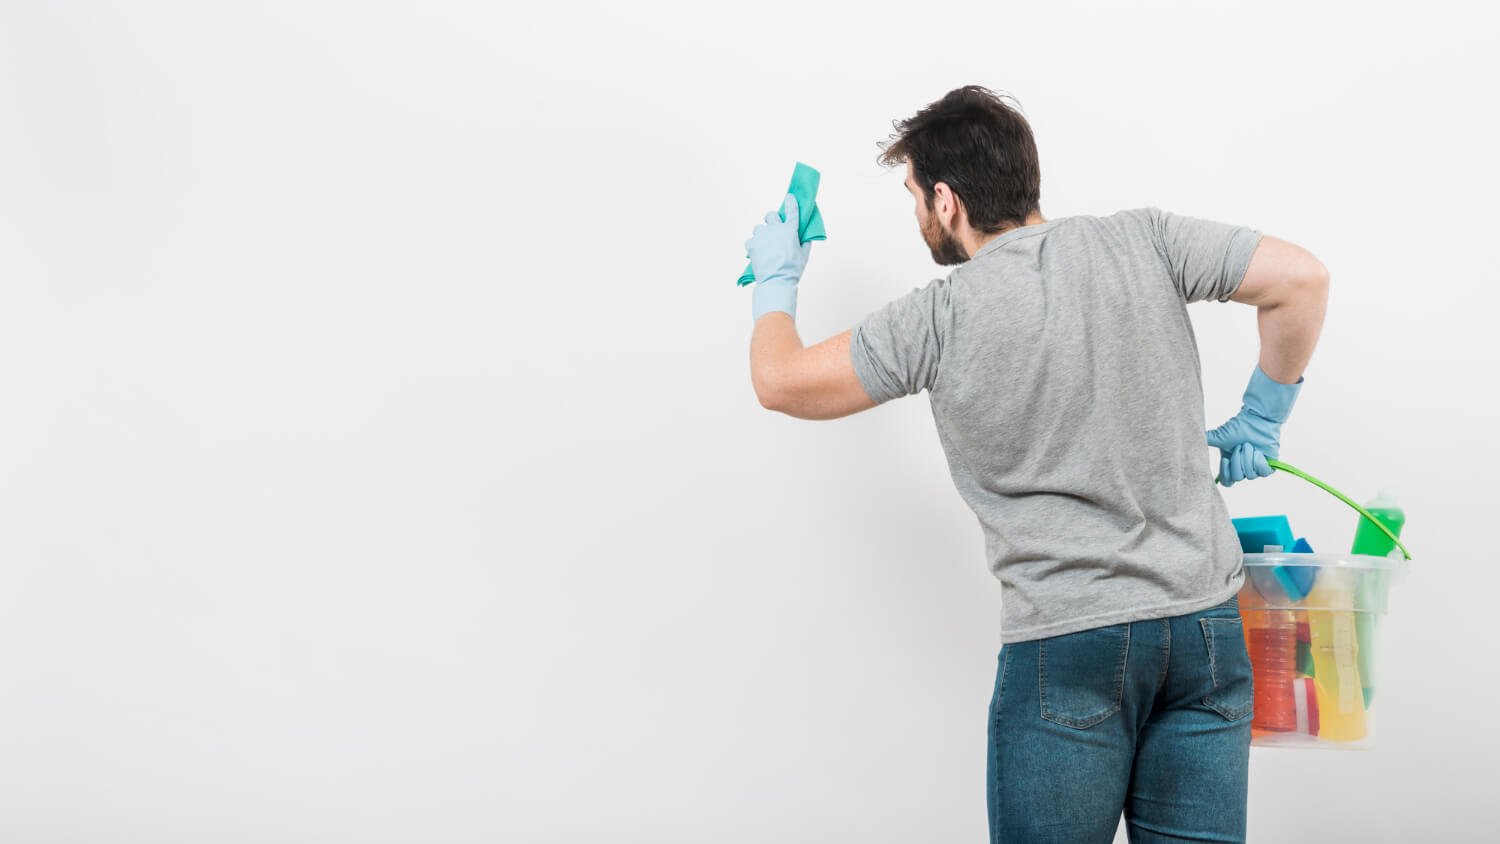 https://images.squarespace-cdn.com/content/v1/64191d7870a5ba0abd5d98ed/af1dd533-8761-45fc-b533-e35d724af49c/concept-man-cleaning-his-home-with-copyspace-wall+%281%29.jpg